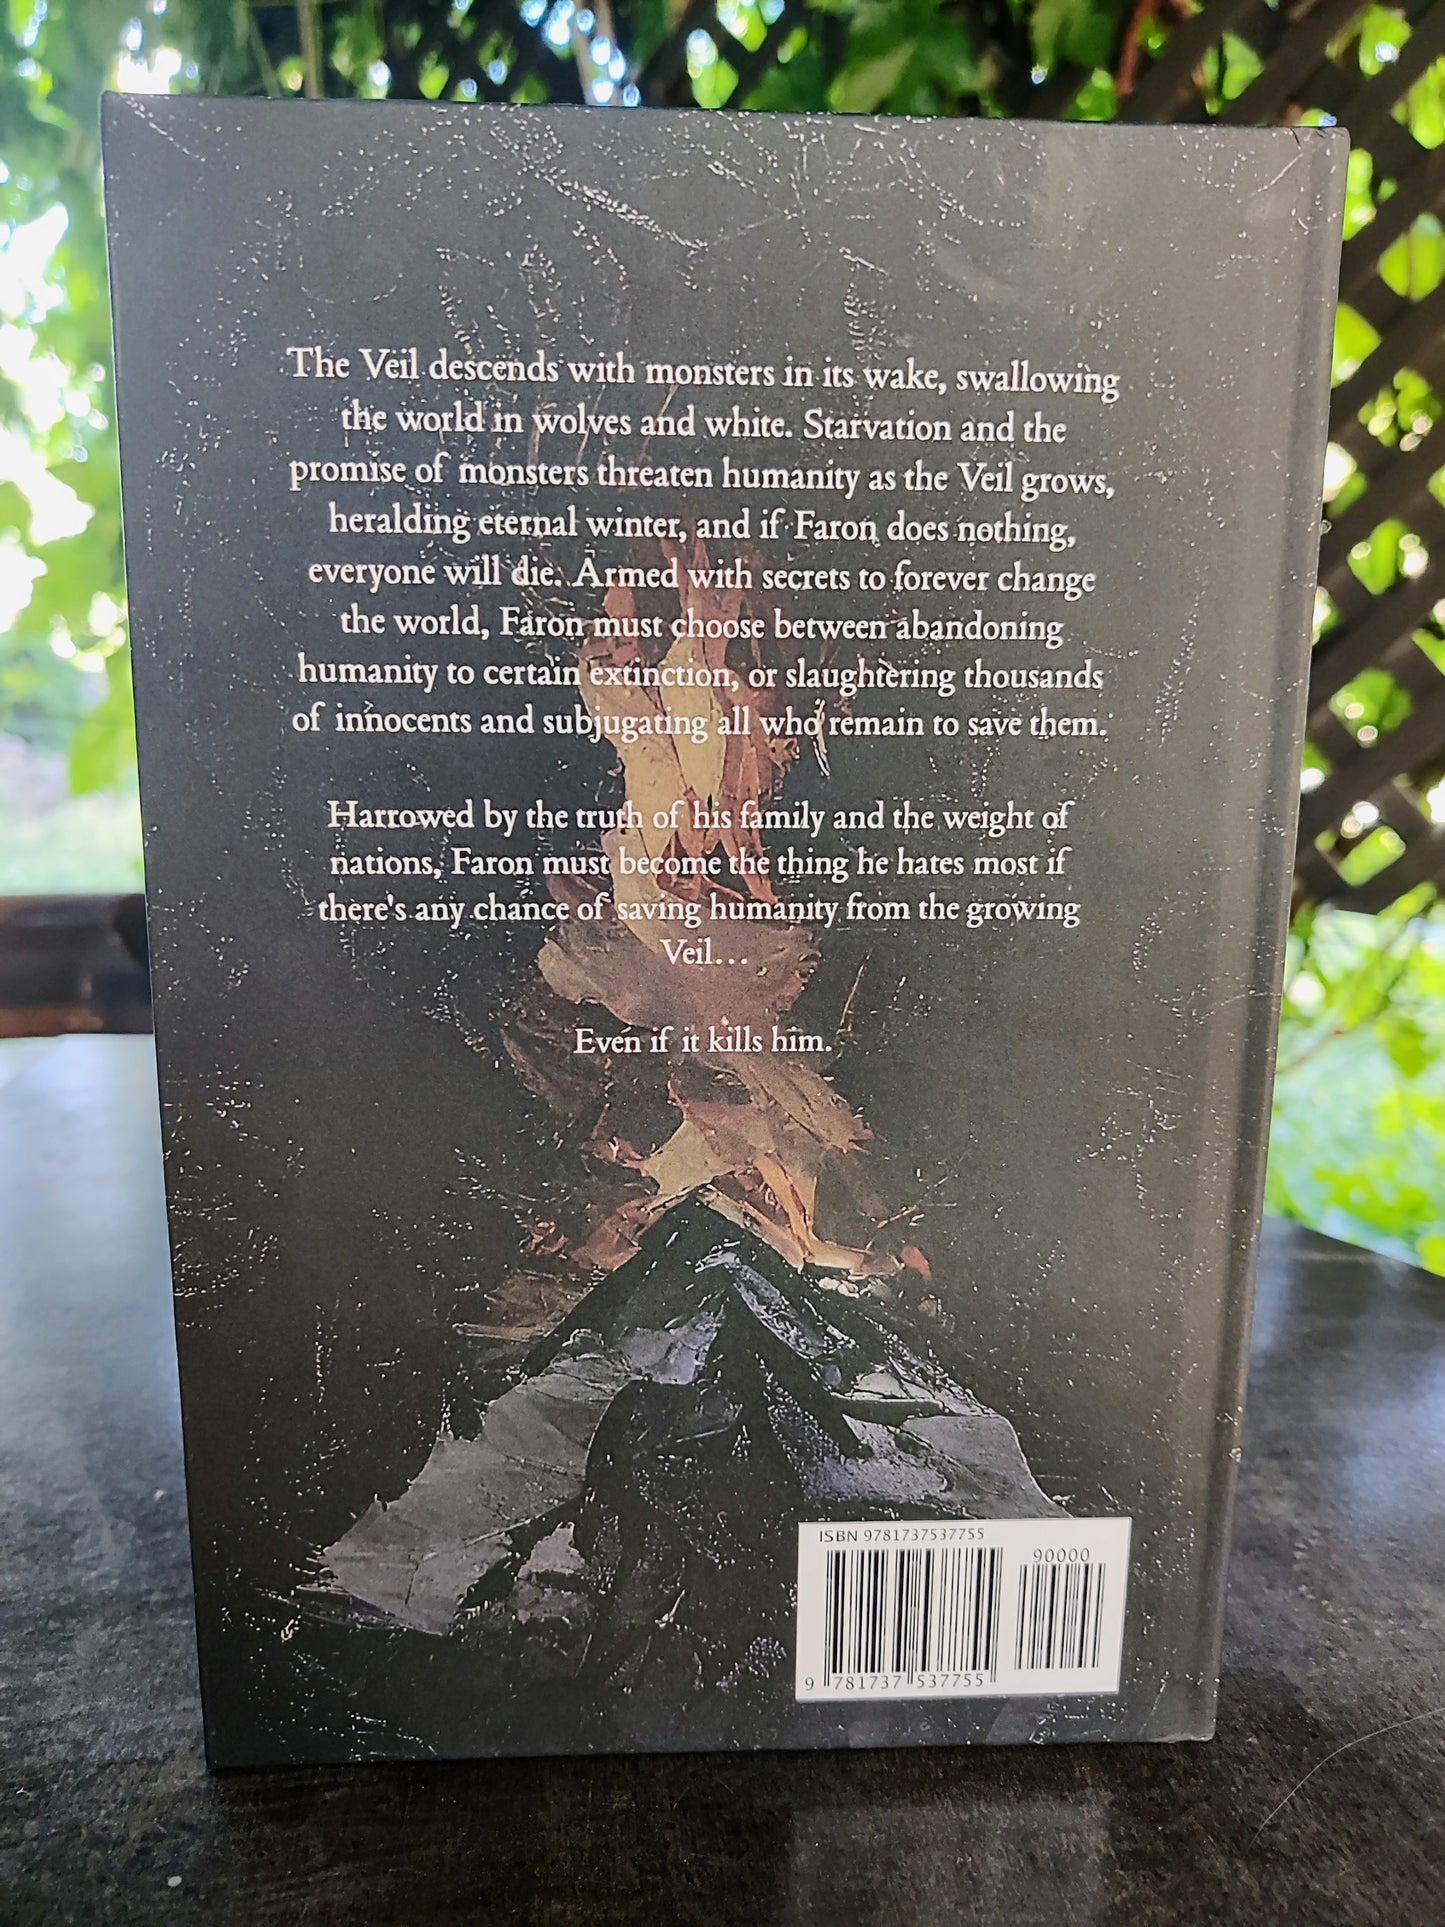 A Pyre of Men and Mountain Signed Hardback